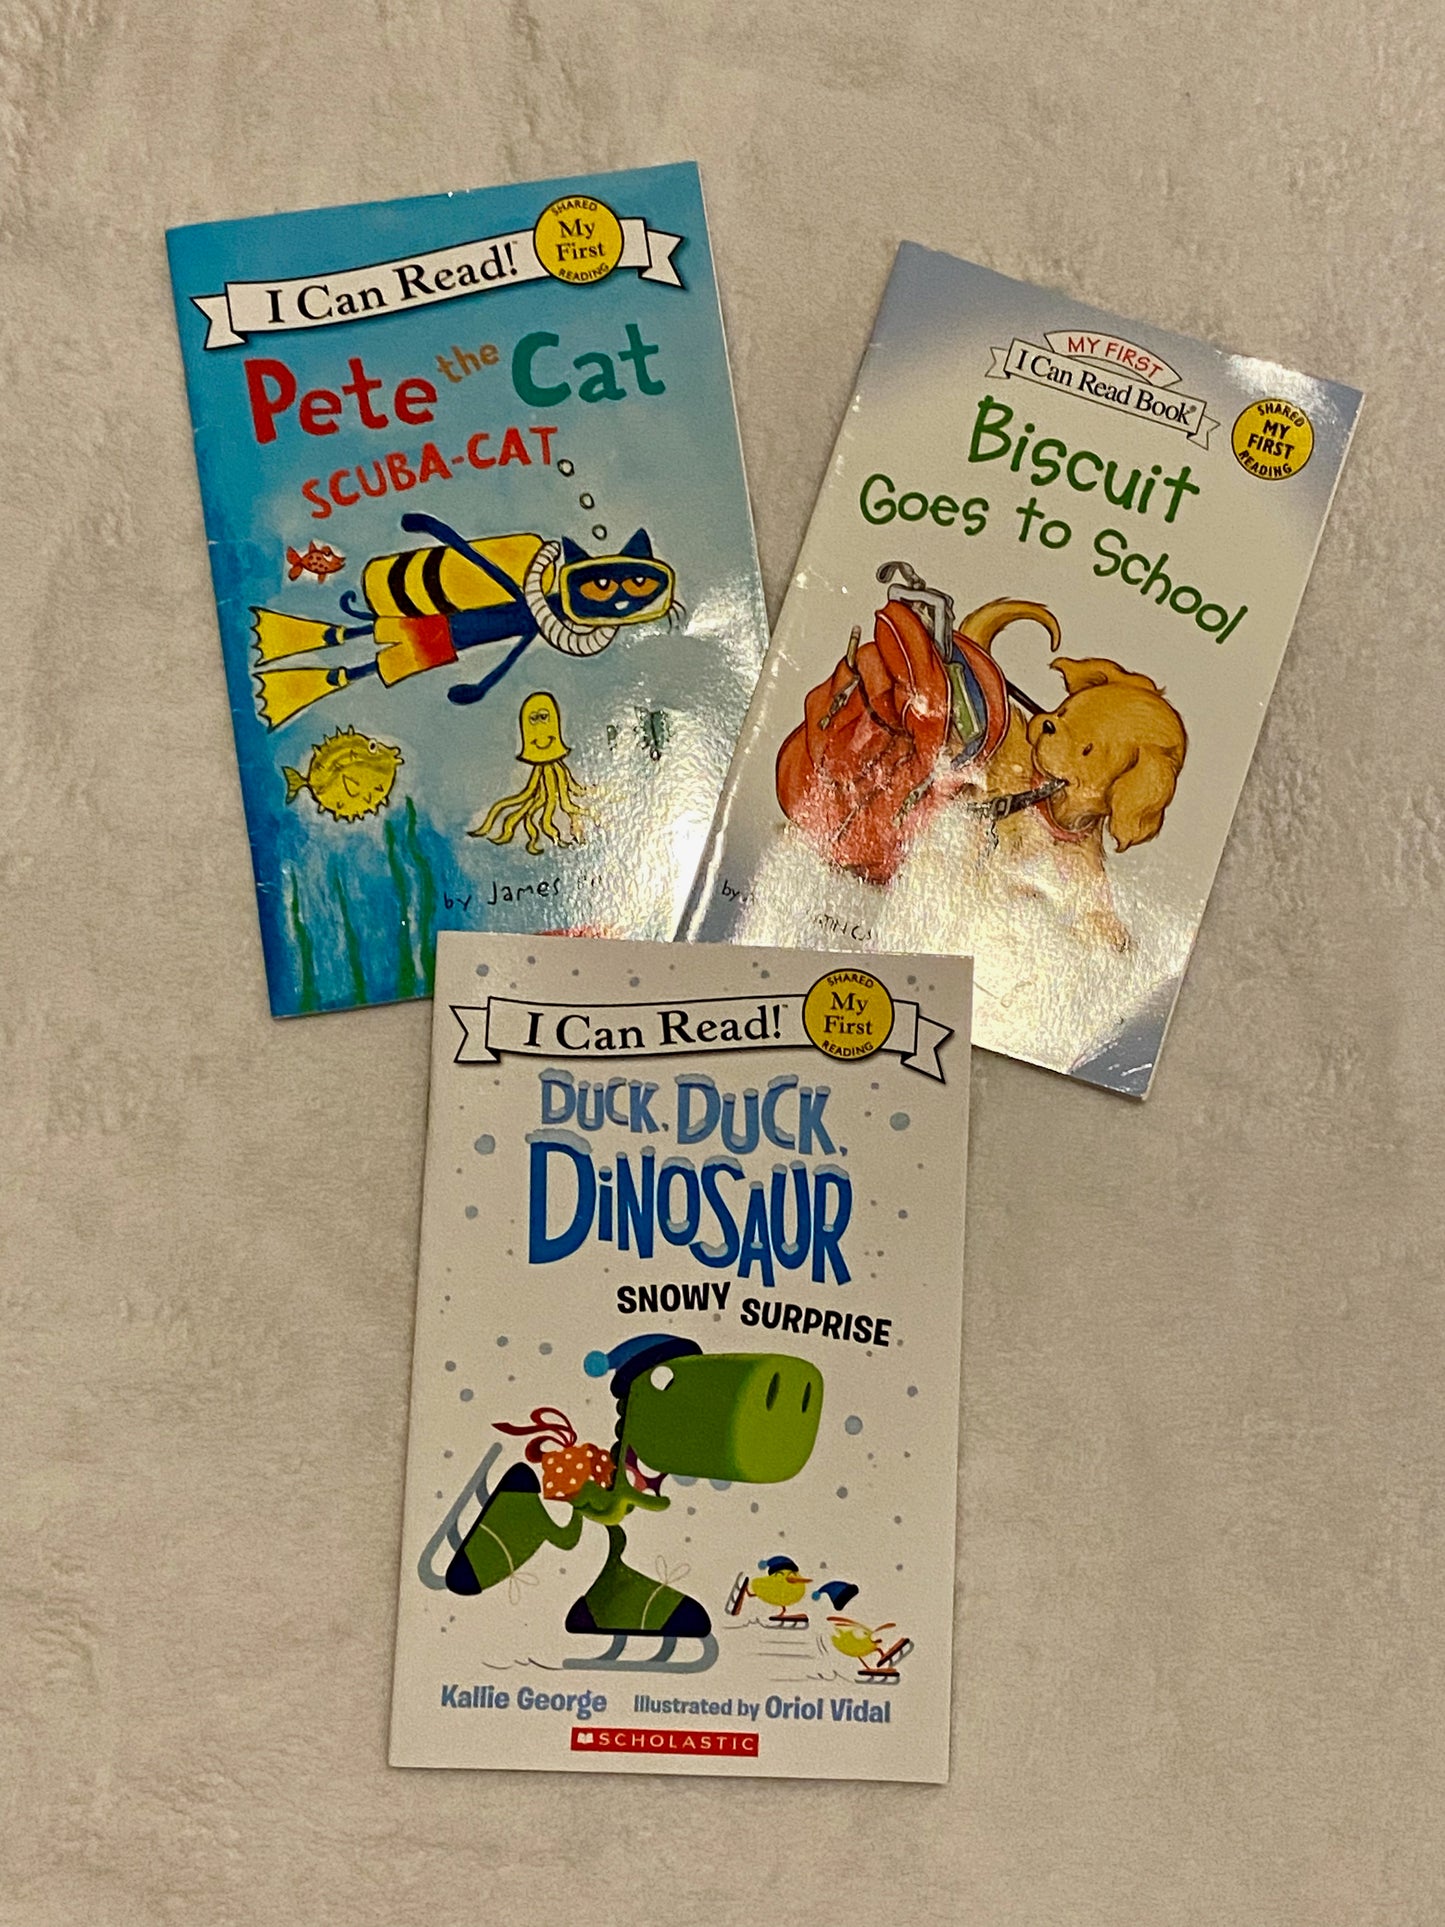 Set of 3 "I Can Read!" books